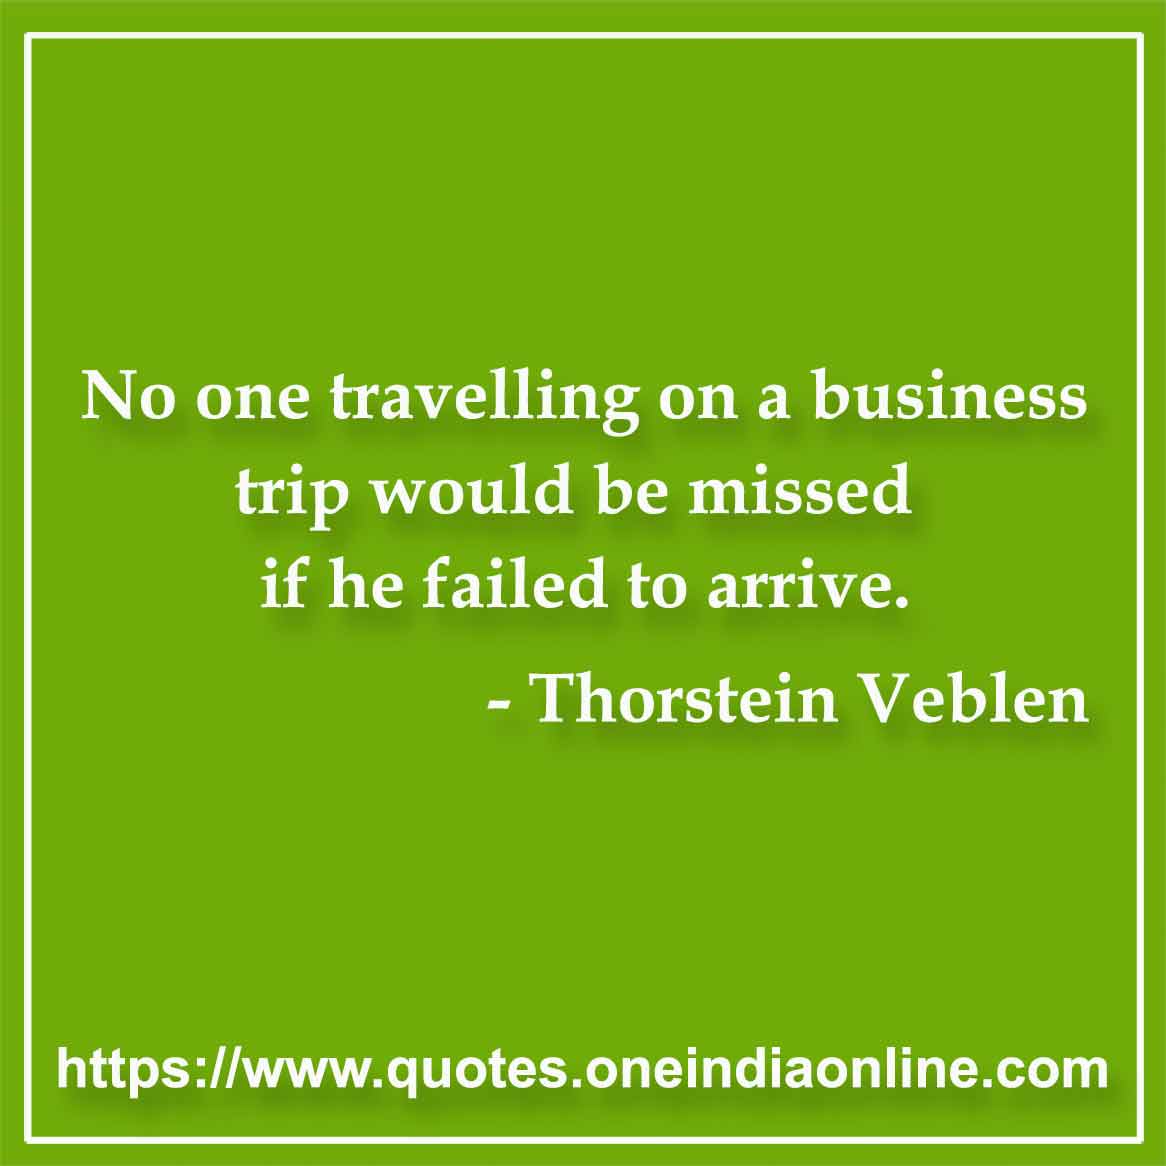 No one travelling on a business trip would be missed if he failed to arrive.

- Thorstein Veblen